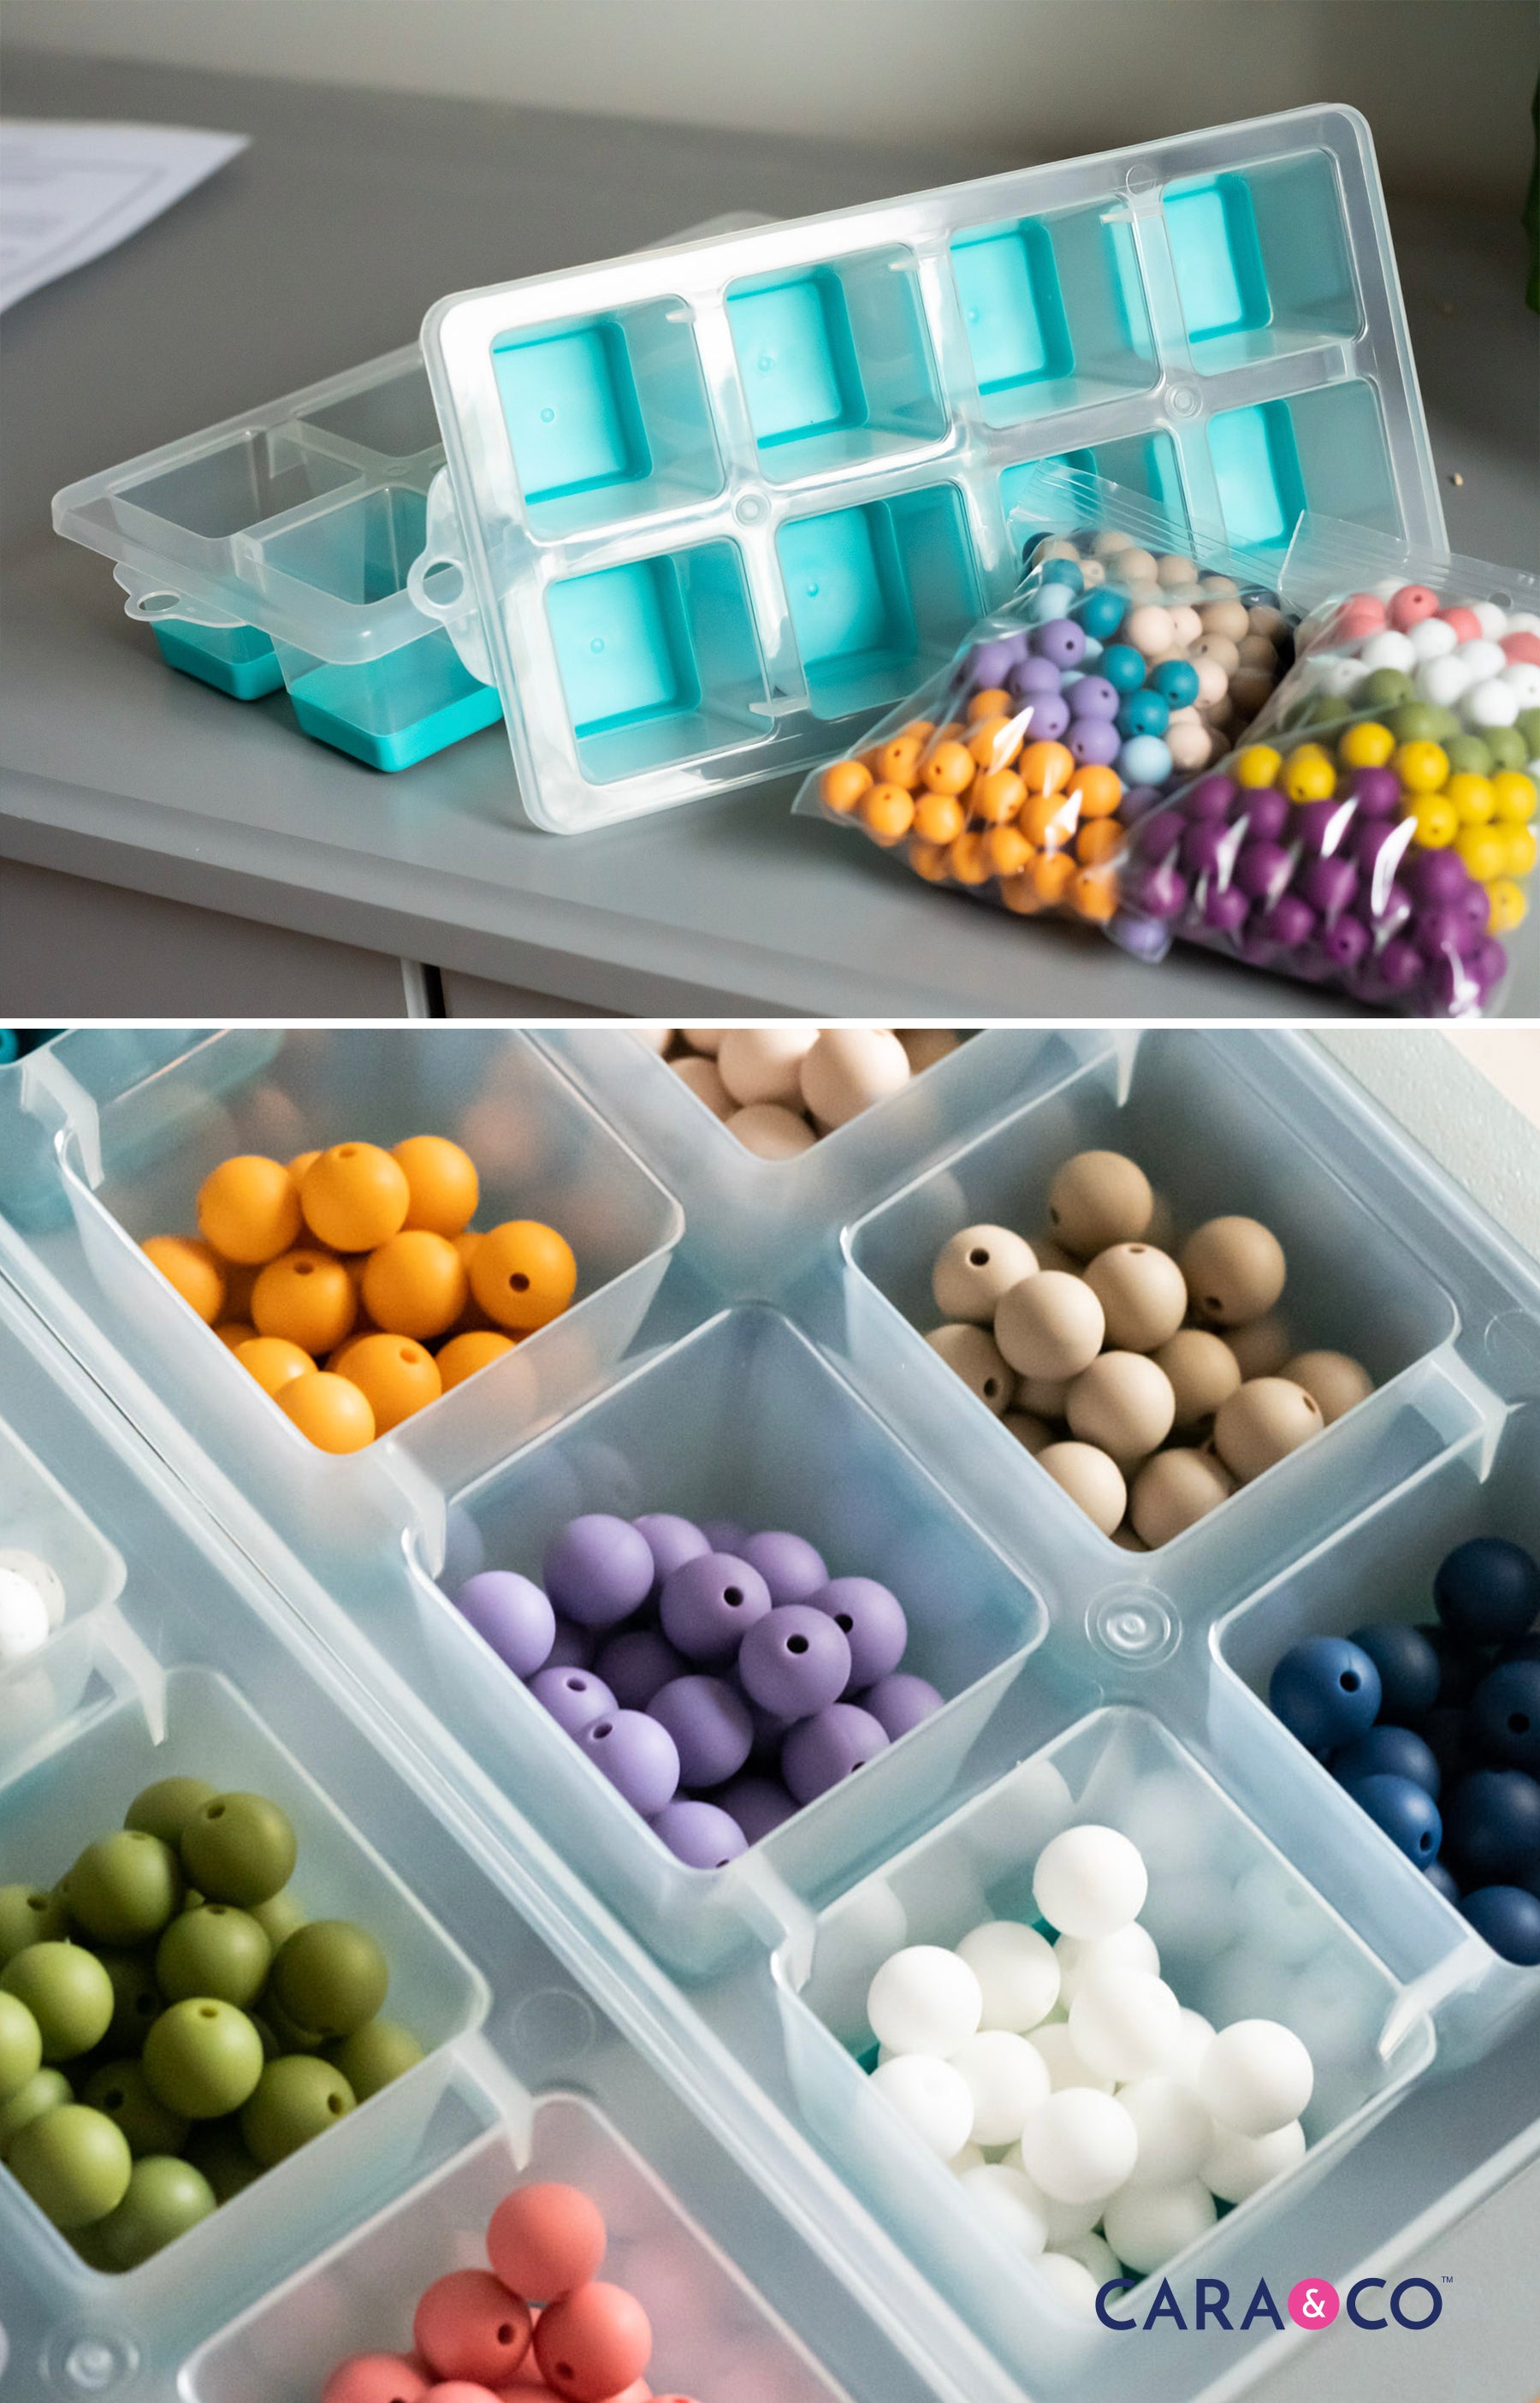 Cheap storage hacks from the dollar store - Cara & Co